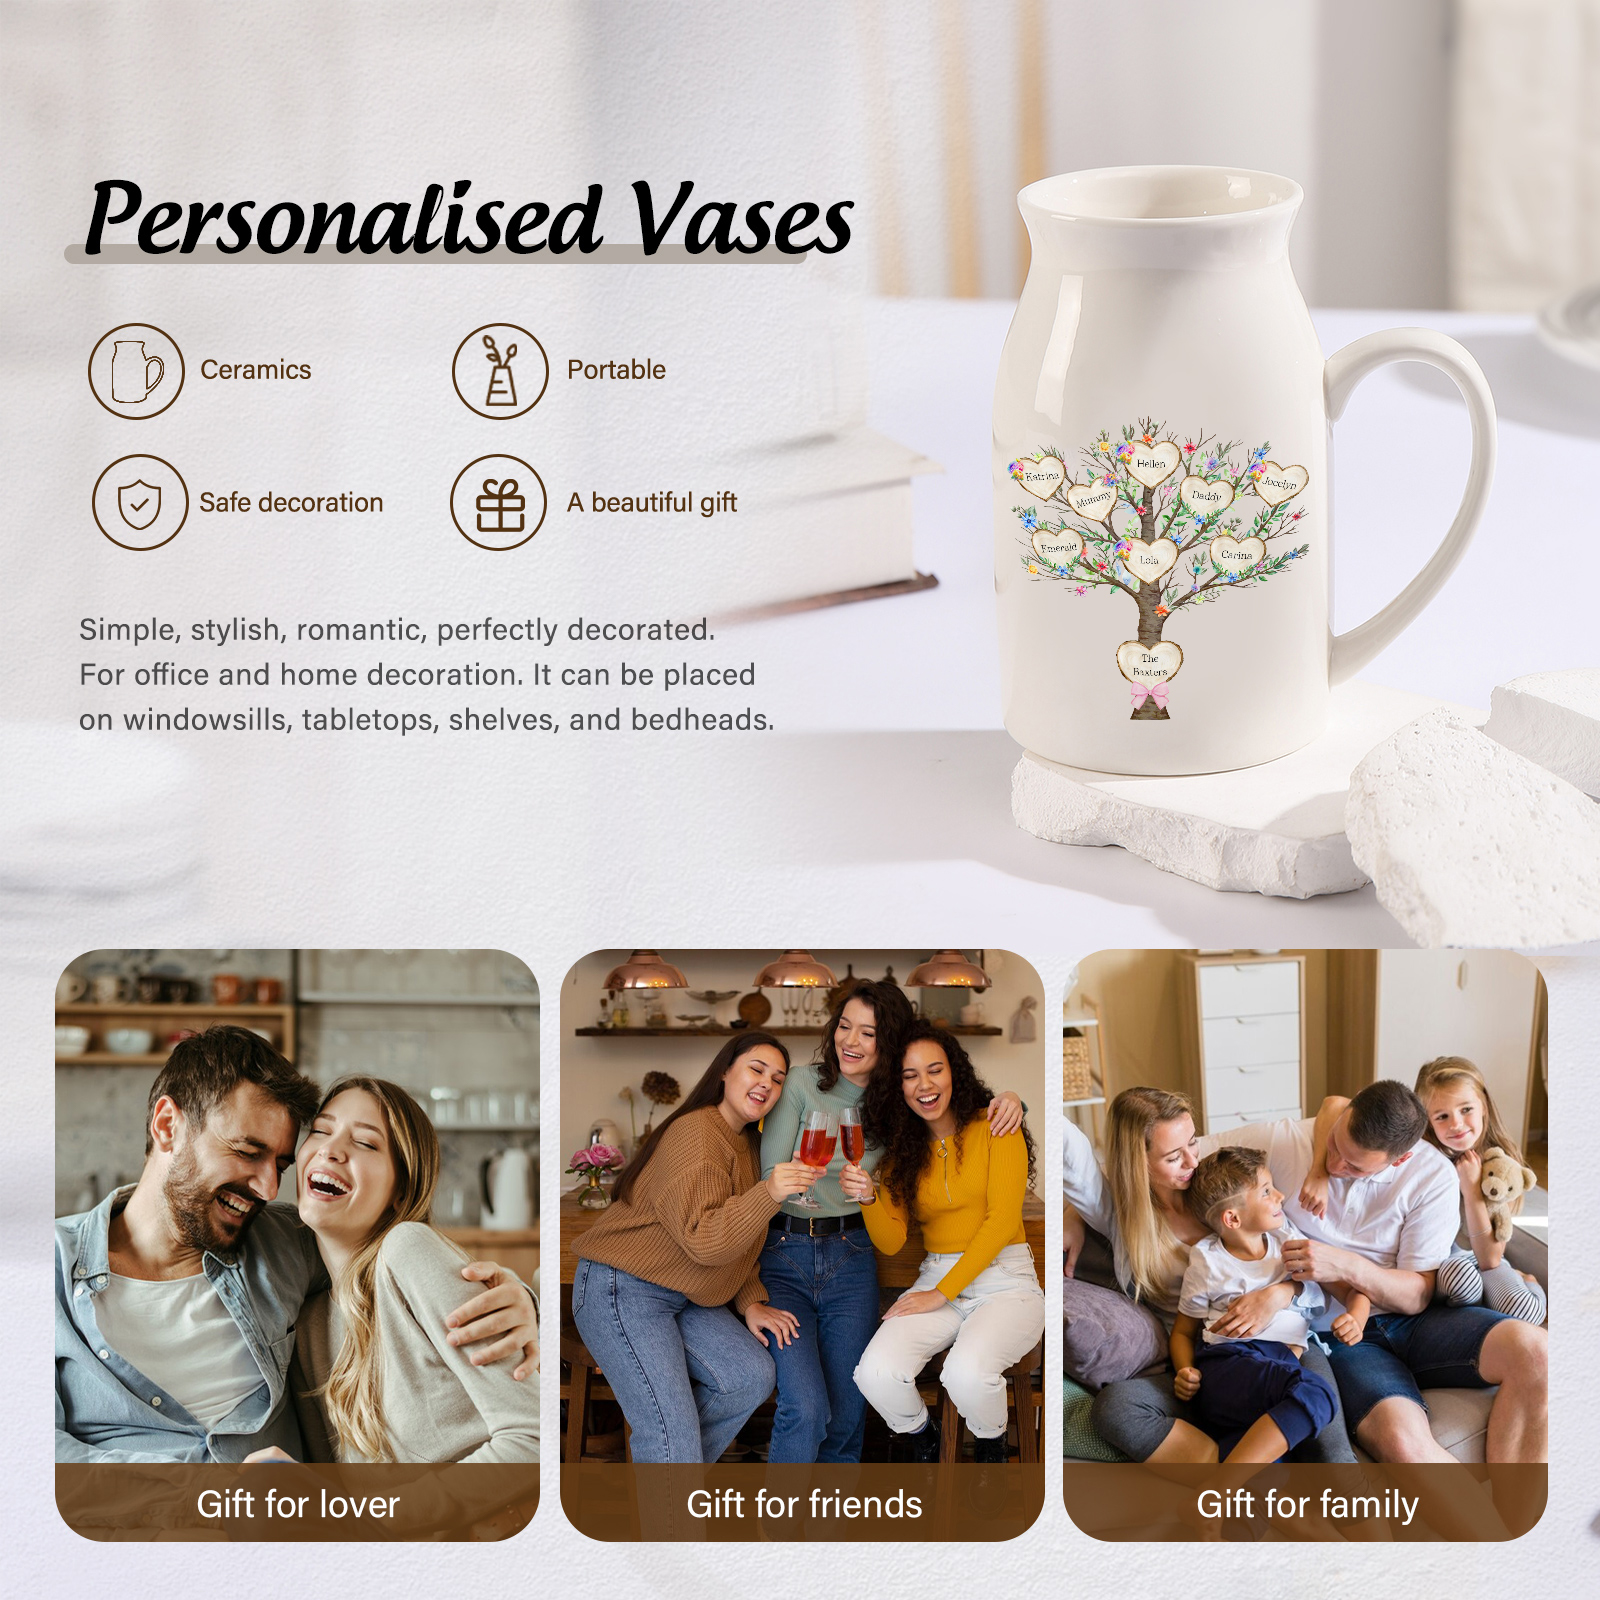 8 Names - Personalized Beautiful Family Tree Style Ceramic Vase with Customizable Names As a Special Gift For Mom/Dad